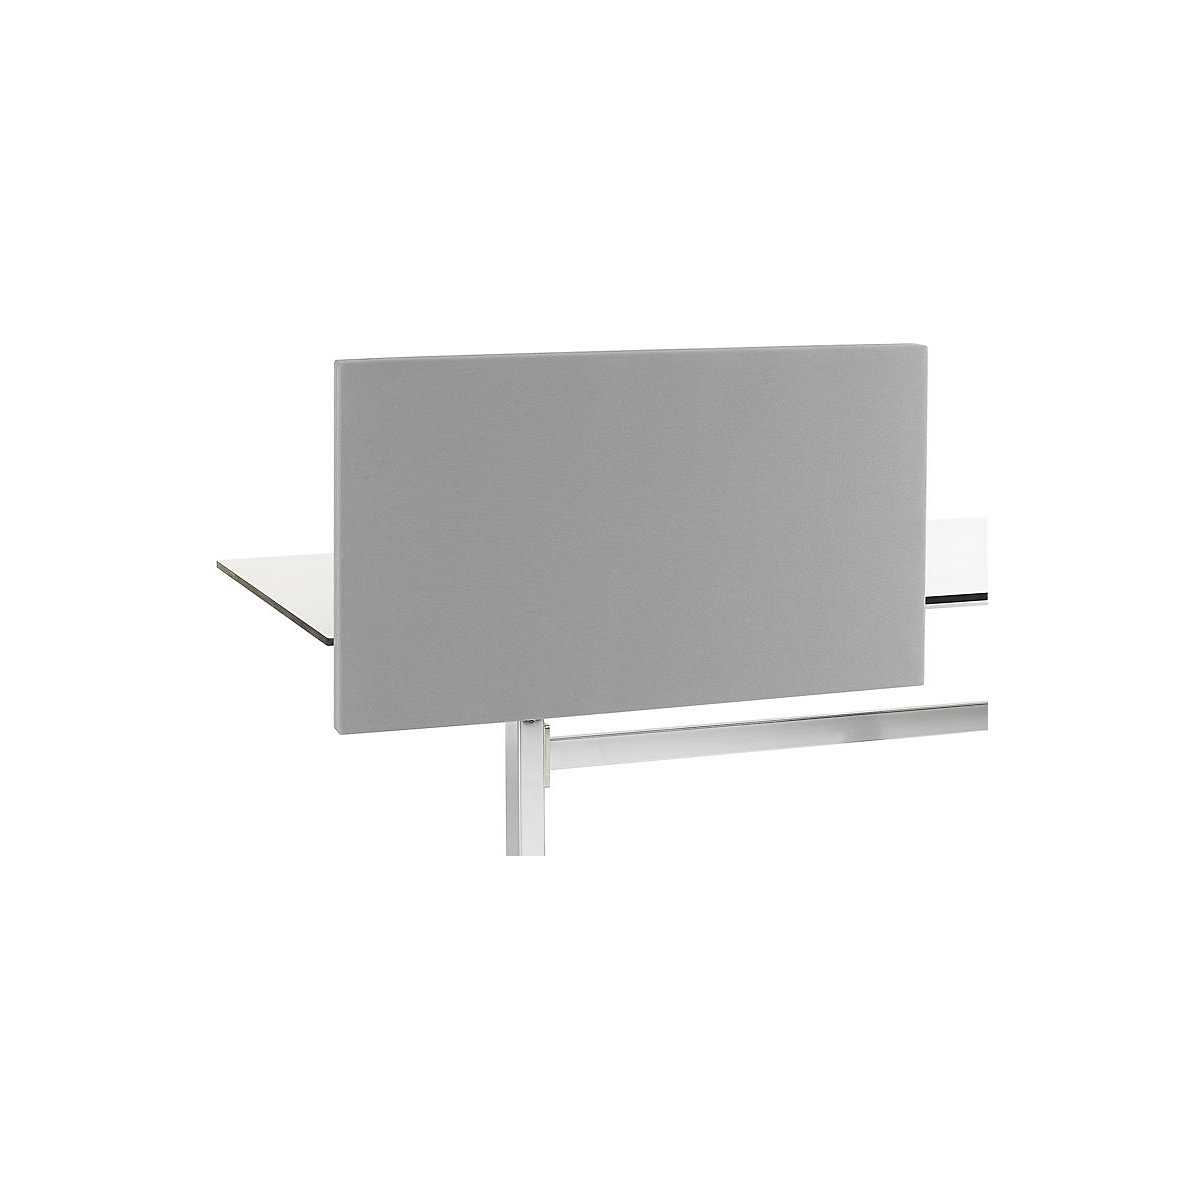 Standard acoustic desk partition with straight corners, HxW 650 x 1800 mm, fabric, grey-1